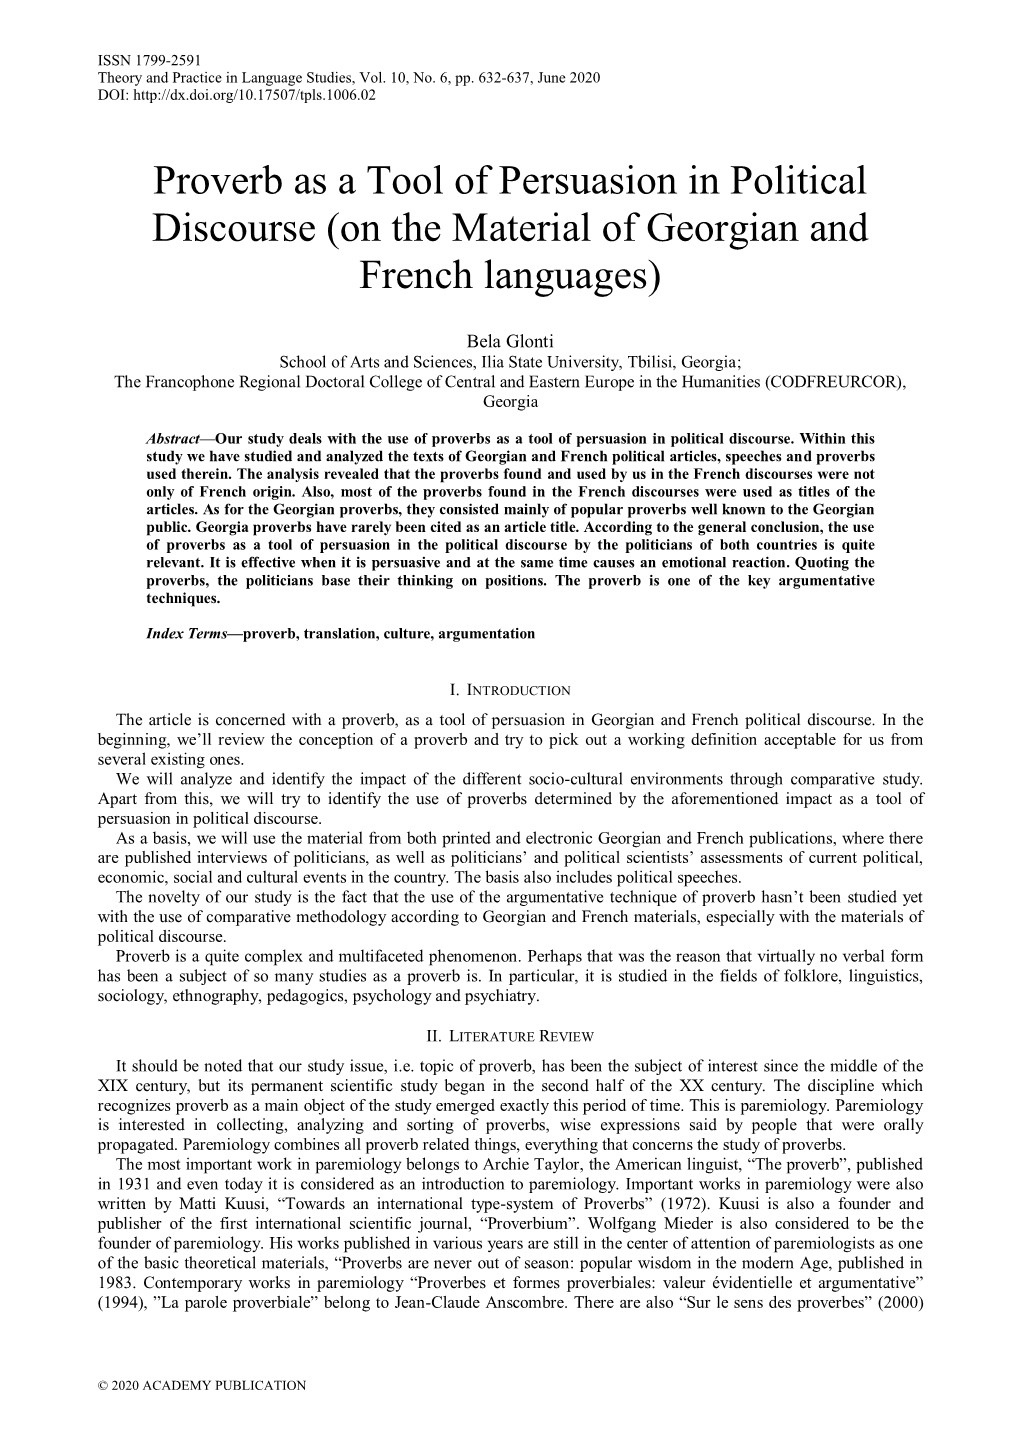 Proverb As a Tool of Persuasion in Political Discourse (On the Material of Georgian and French Languages)